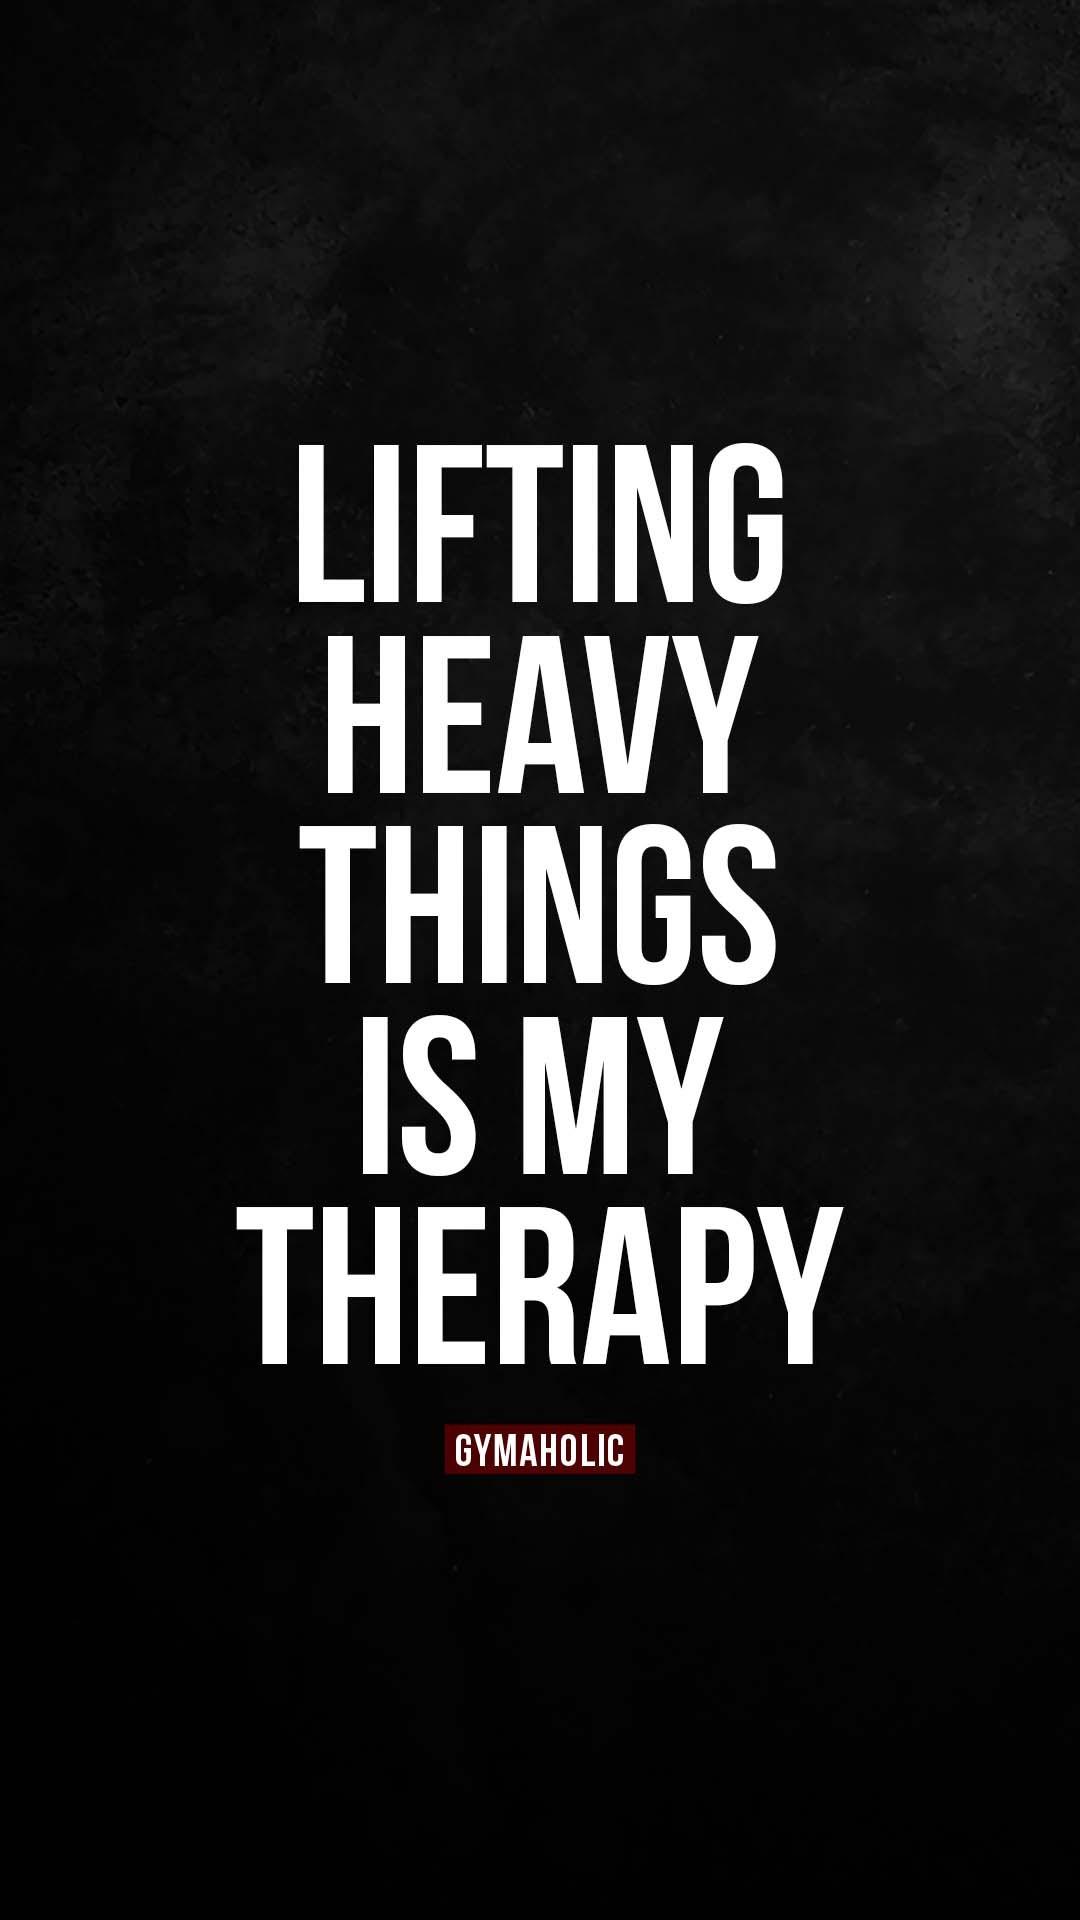 Lifting heavy things is my therapy